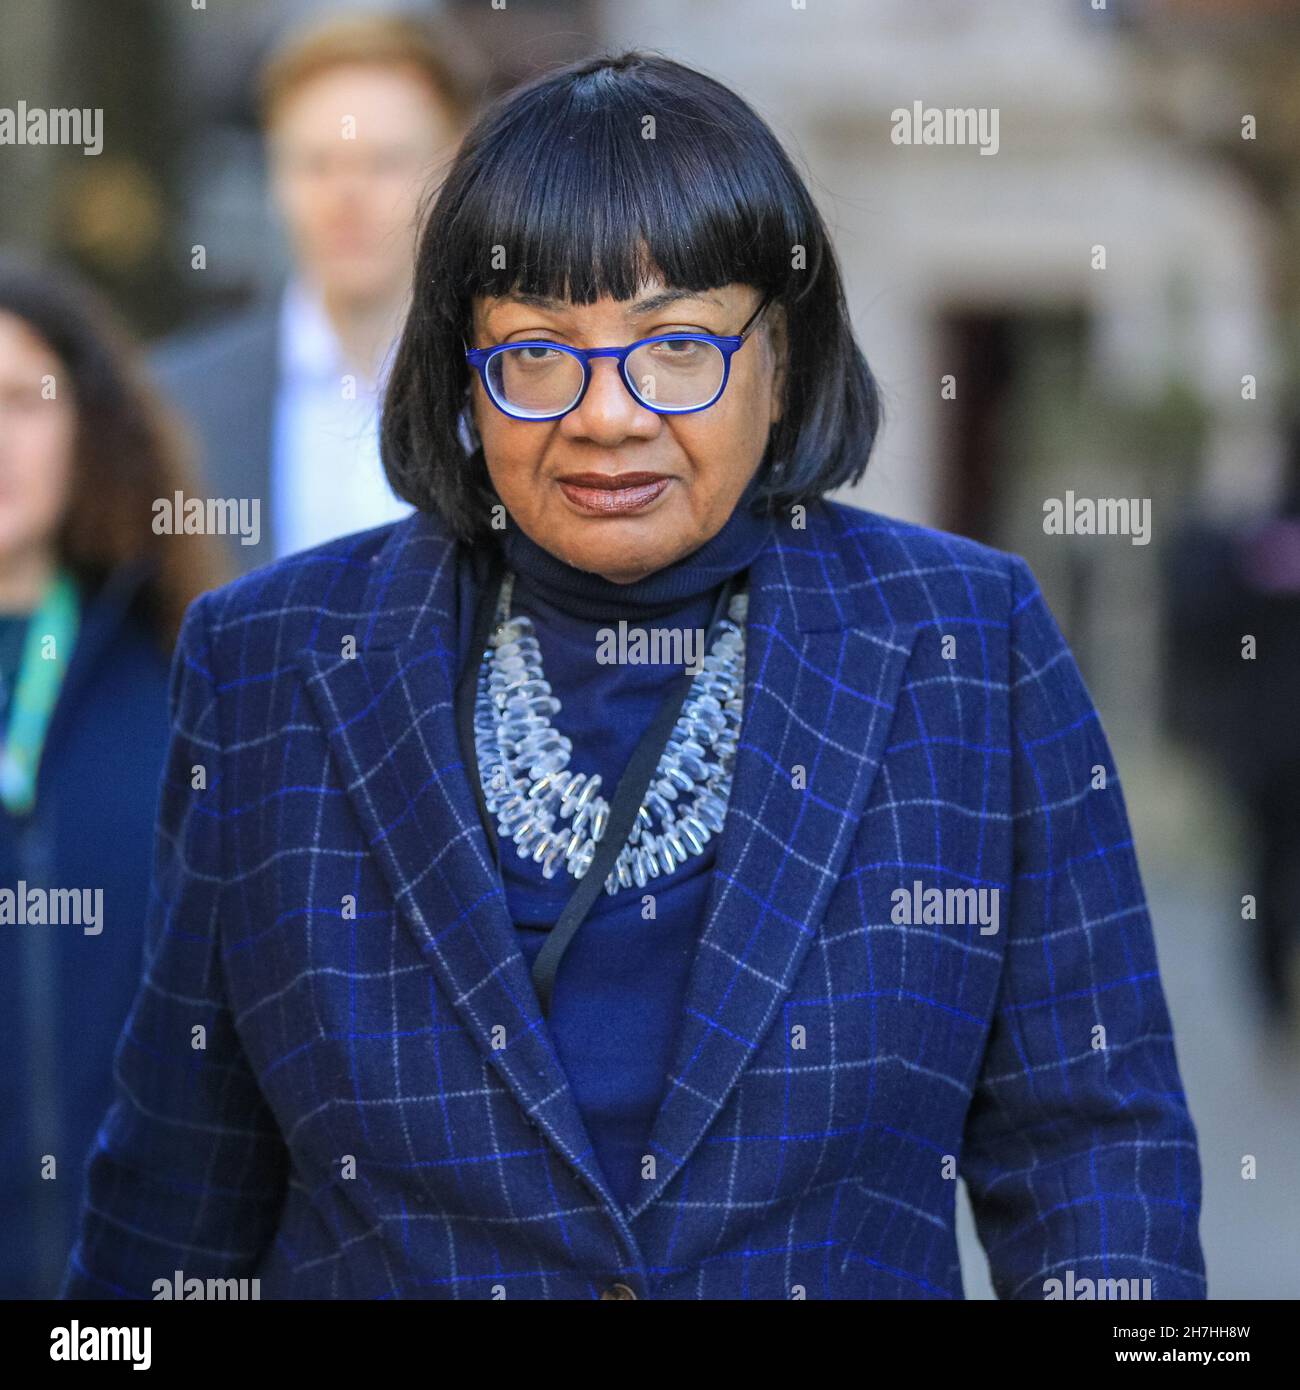 Westminster, London, UK. 23rd Nov, 2021. Diane Abbott, Labour MP for Hackney North and Stoke Newington, walks in Westminster today. Credit: Imageplotter/Alamy Live News Stock Photo